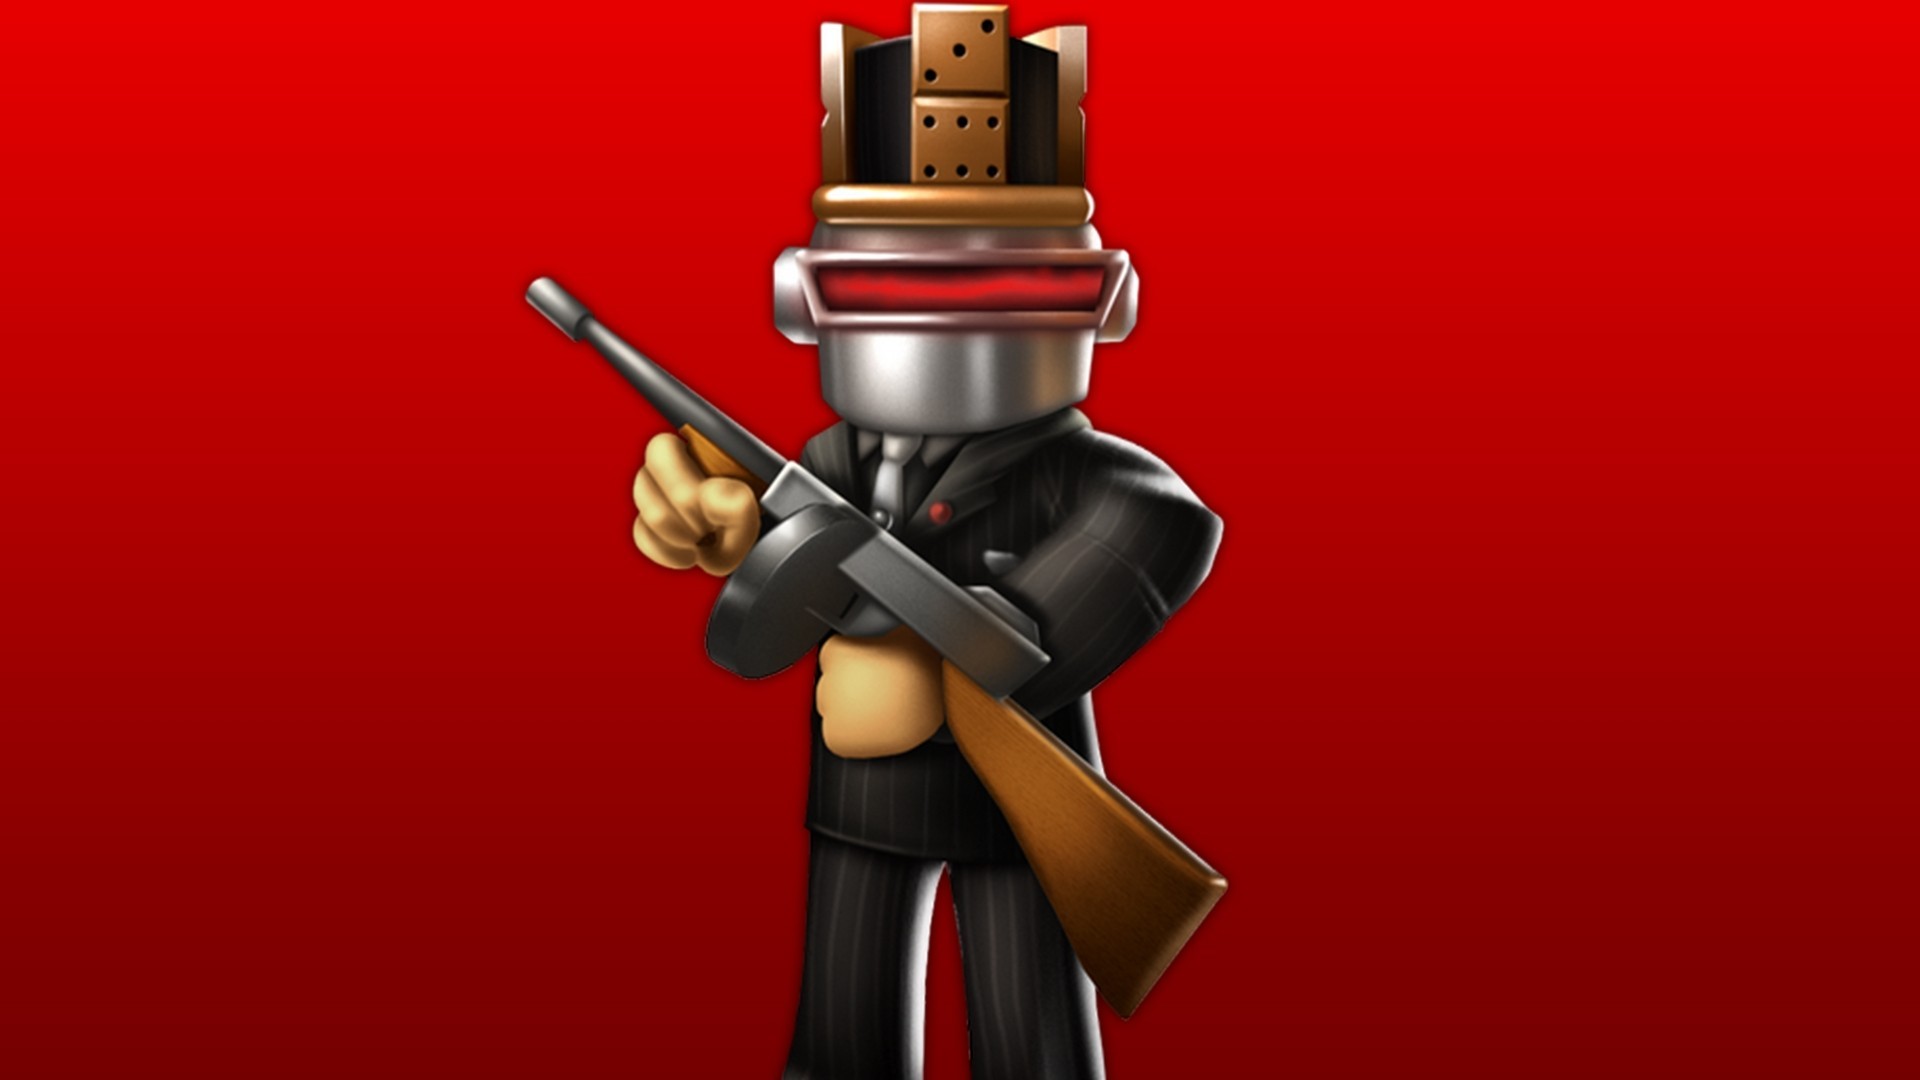 Free Cool Roblox Games Chrome Extension Hd Wallpaper Theme Tab For Chrome Browser - roblox hd new tab wallpapers